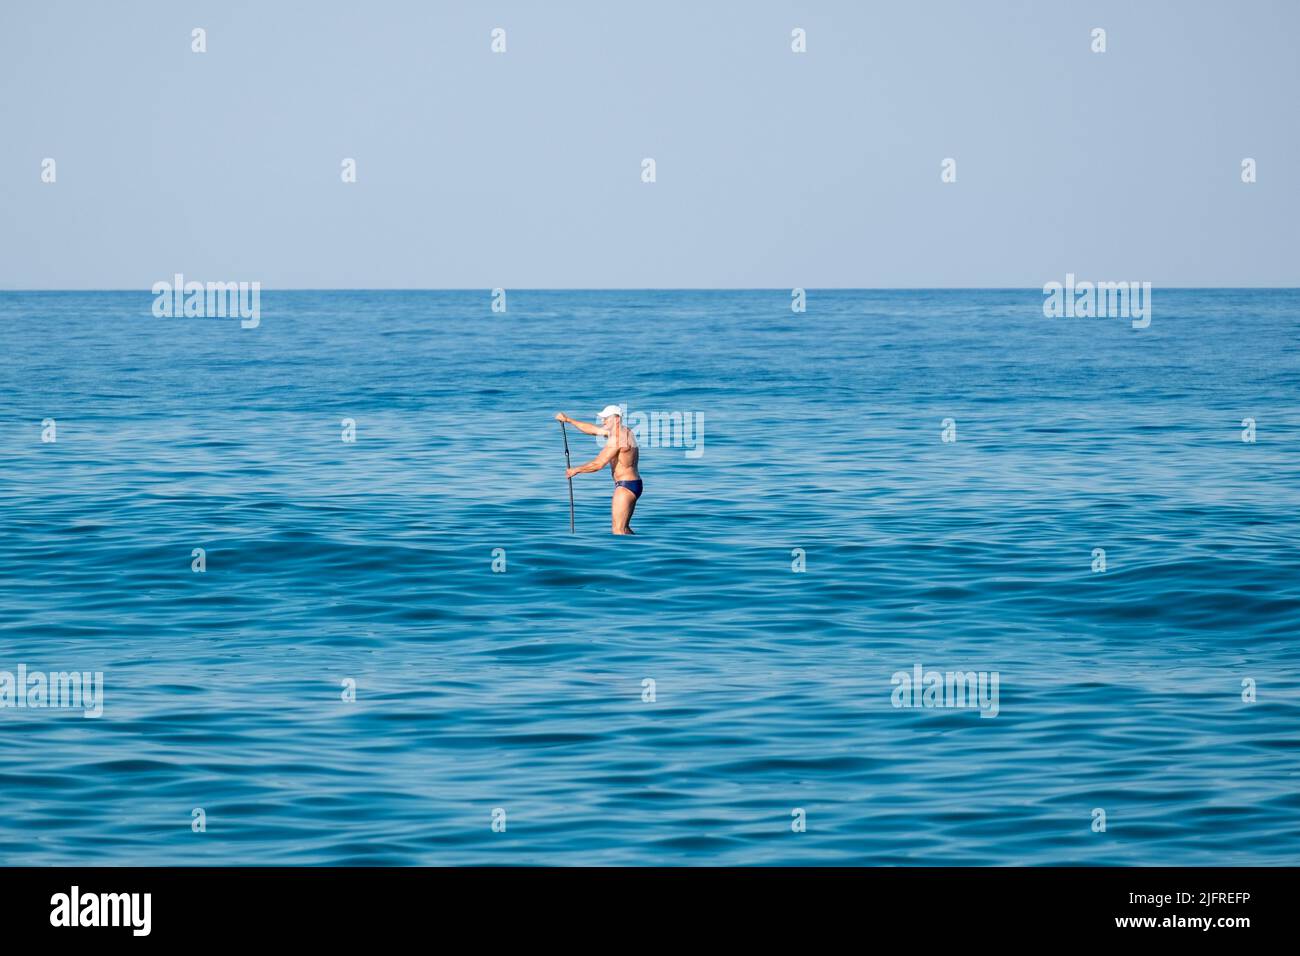 A man on  stand up paddleboard Stock Photo